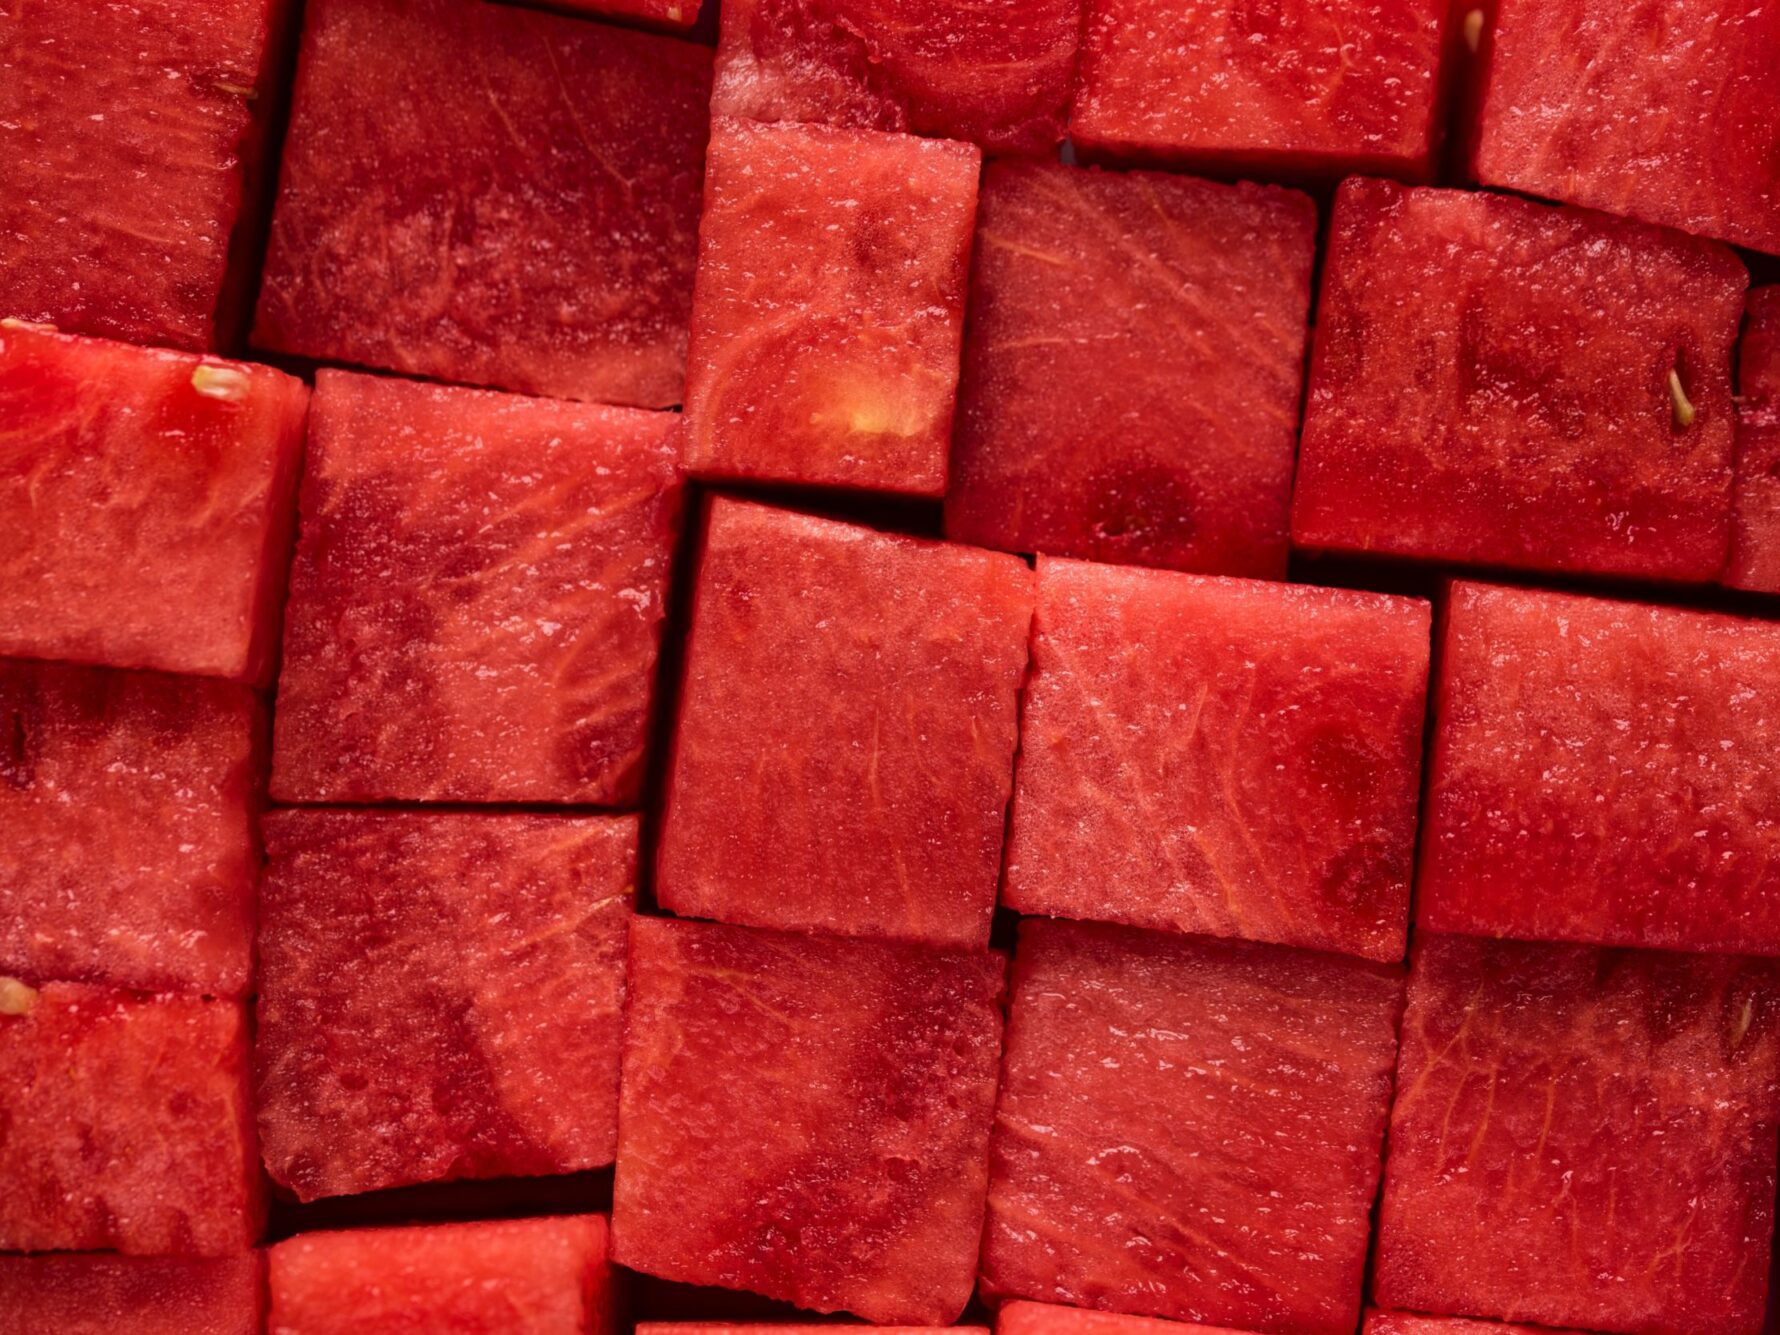 Red watermelon cubes